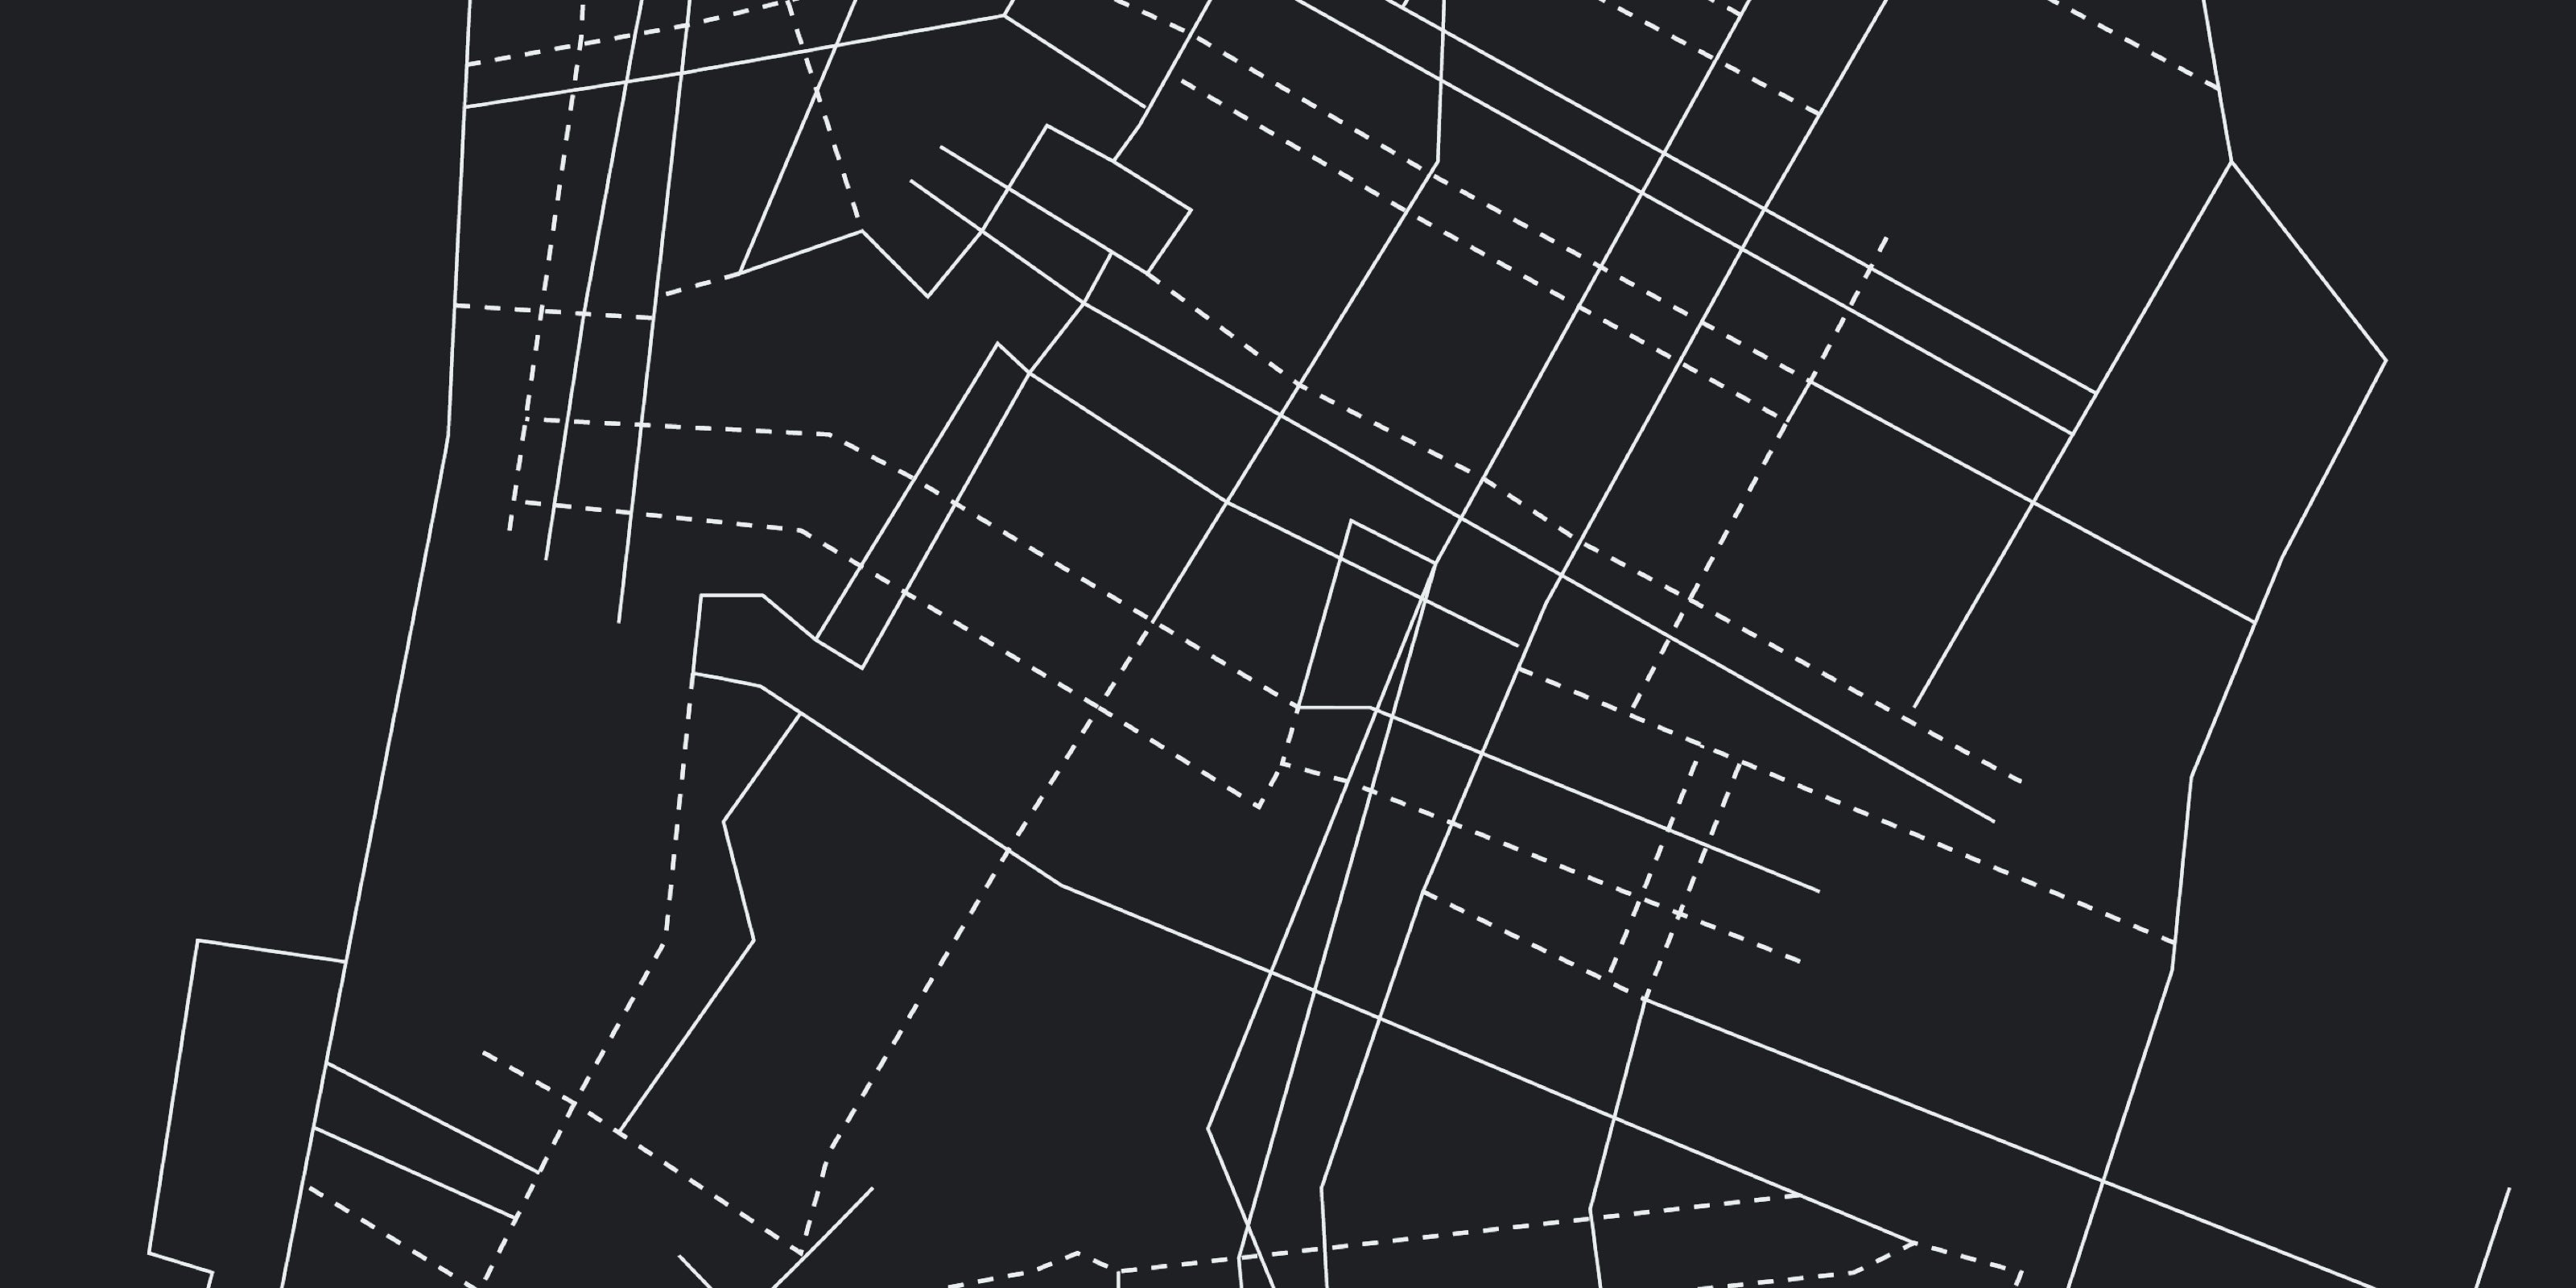 A graphic pattern of the NYC city streets.